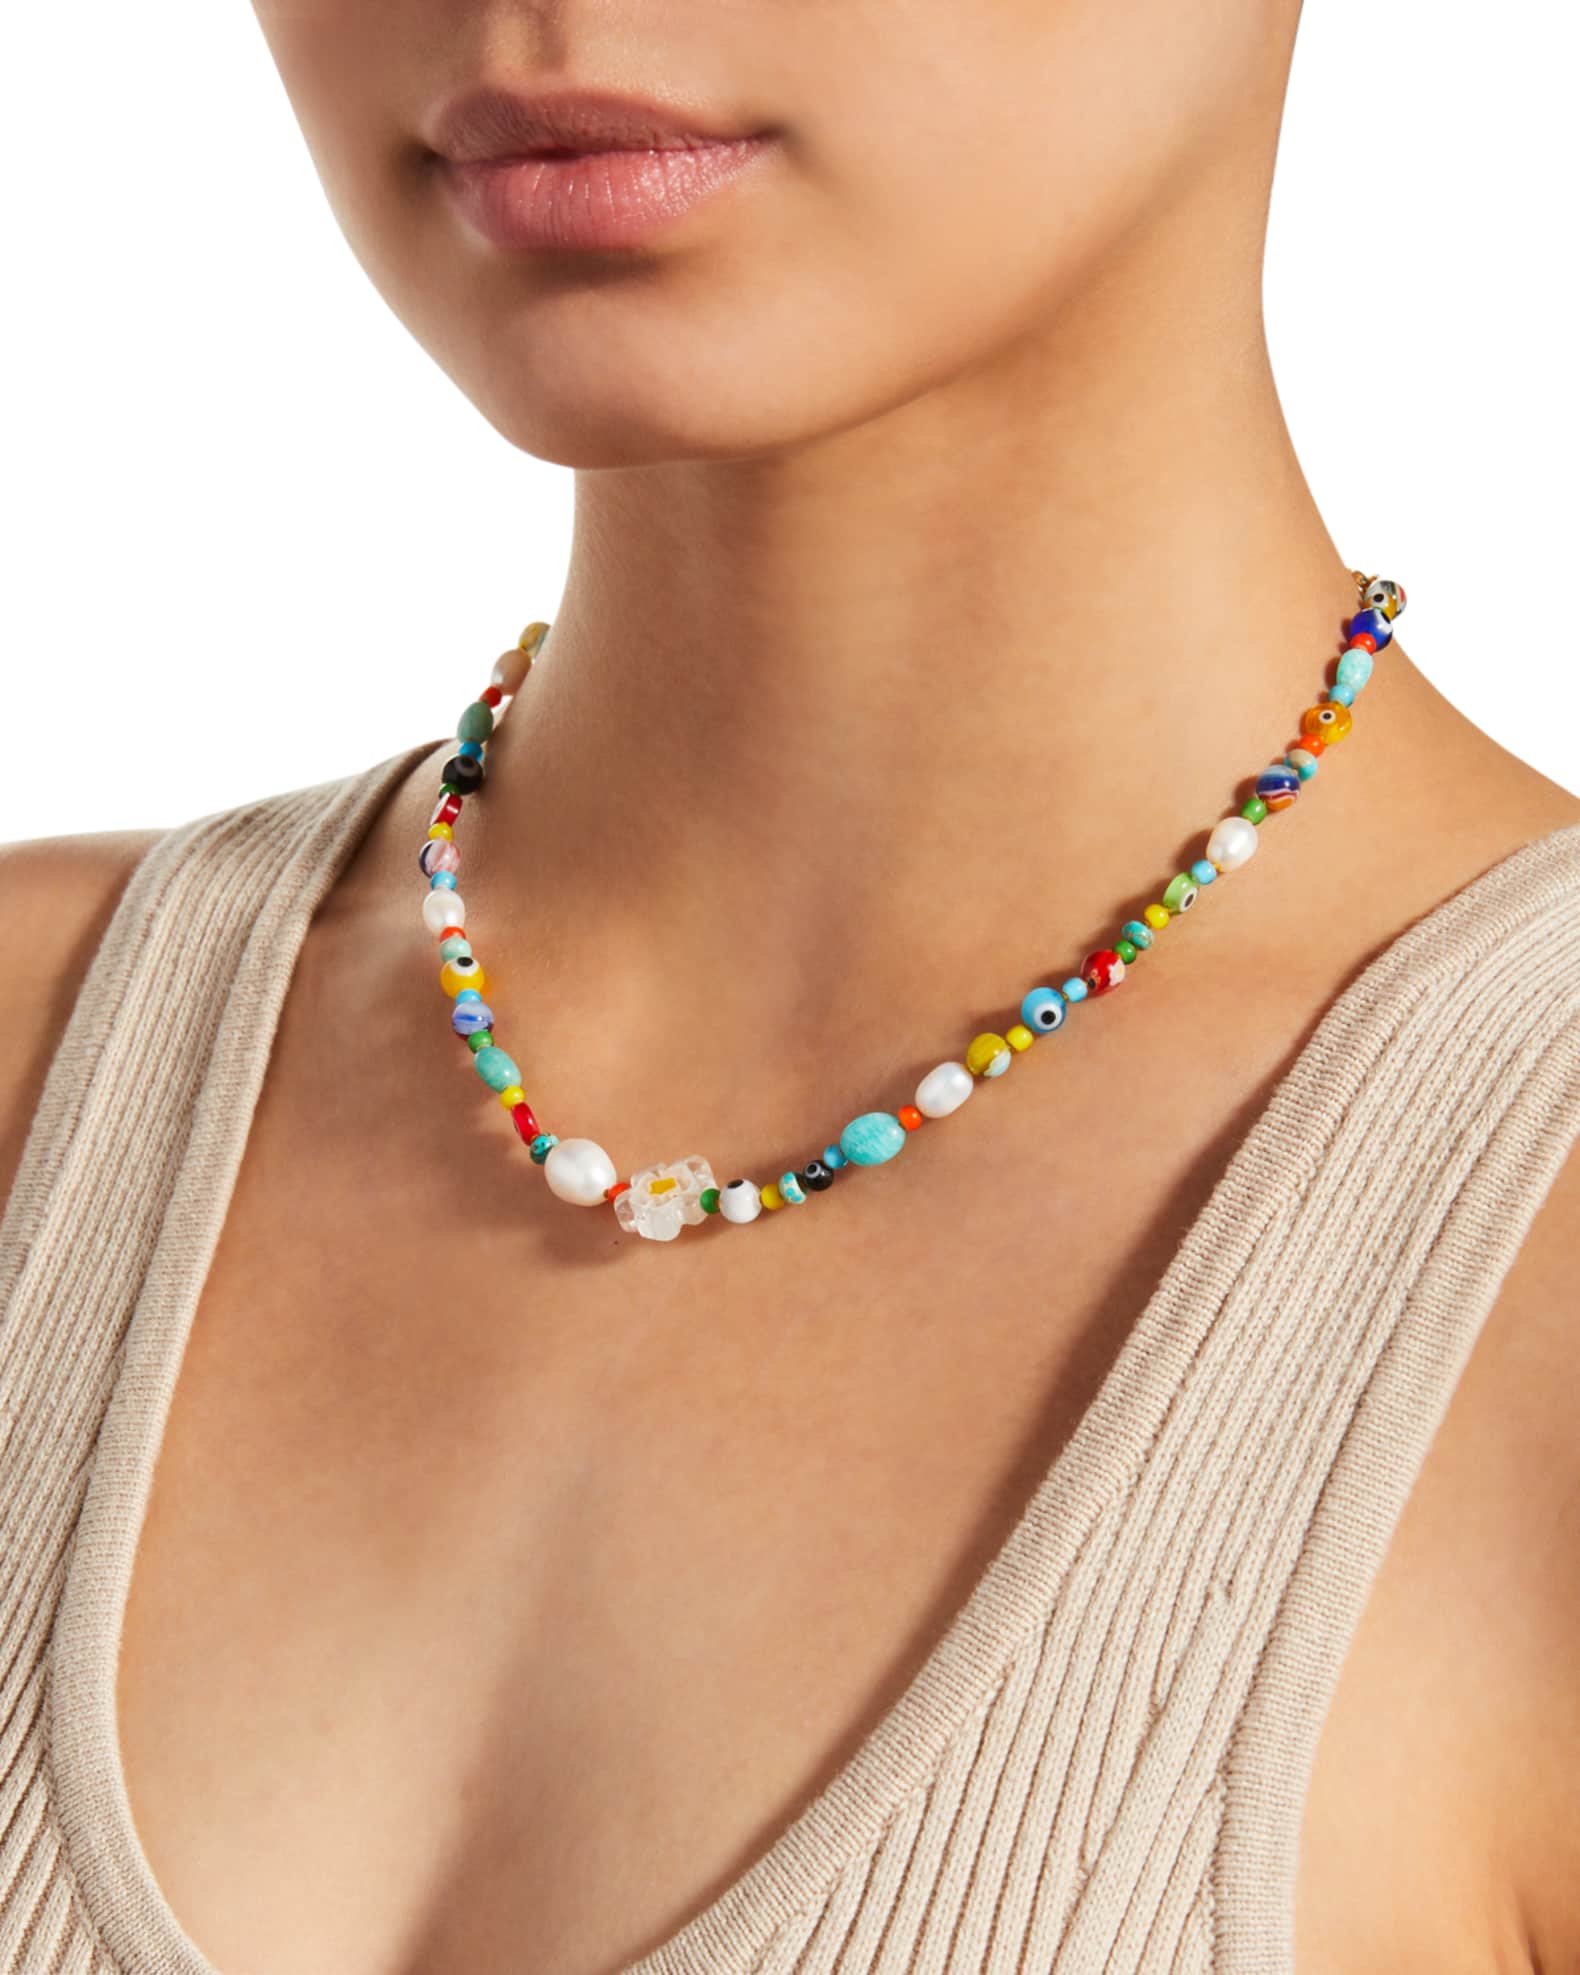 Tai Beaded Necklace with Pearls | Neiman Marcus